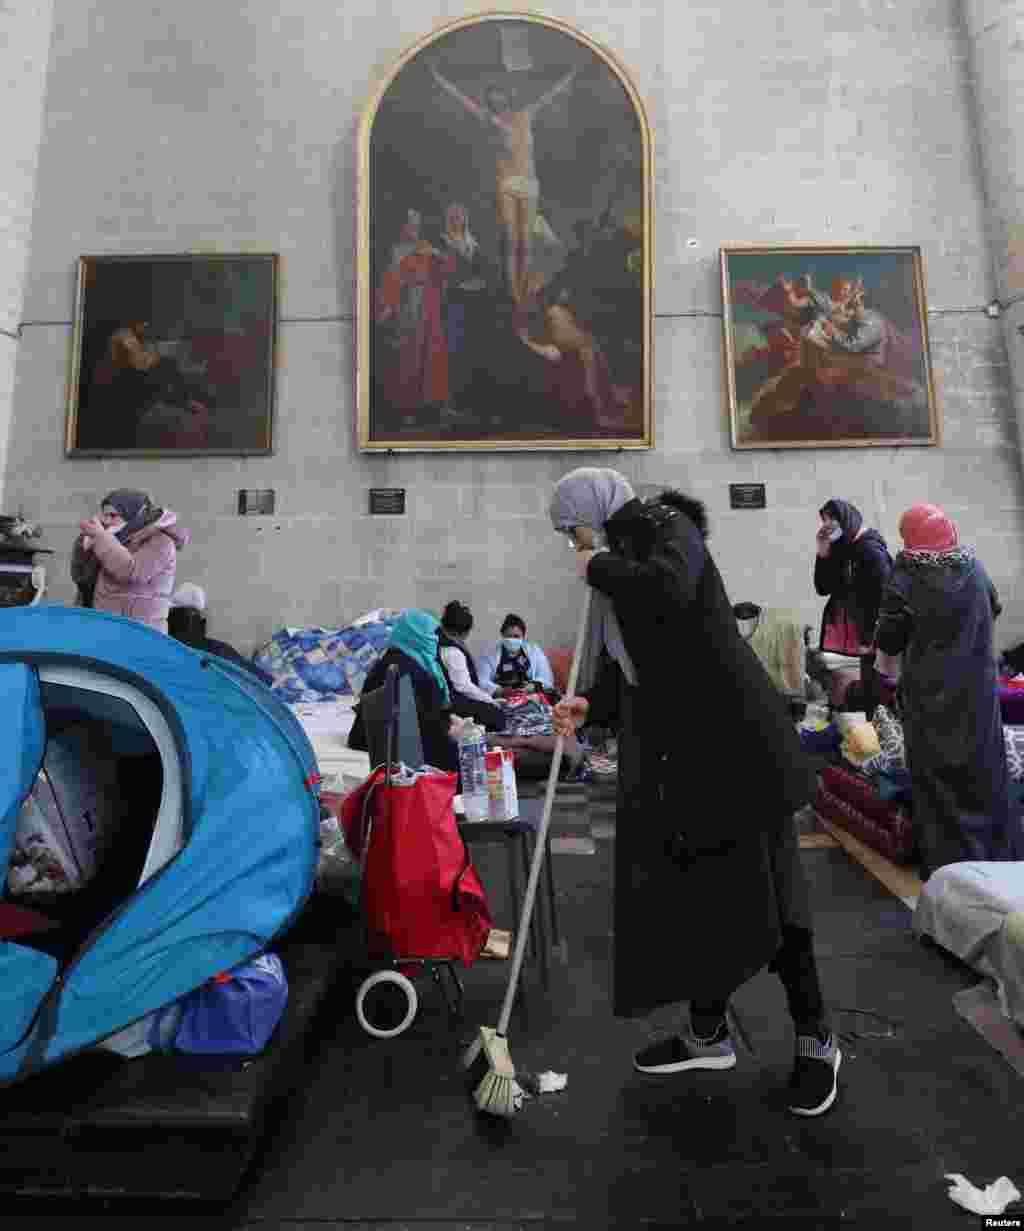 Illegal migrants, requesting to be recognized by the Belgian government to have access to heathcare, stay inside the Saint-Jean-Baptiste-au-Beguinage church during the COVID-19 outbreak, in Brussels, Belgium, Feb. 23, 2021.